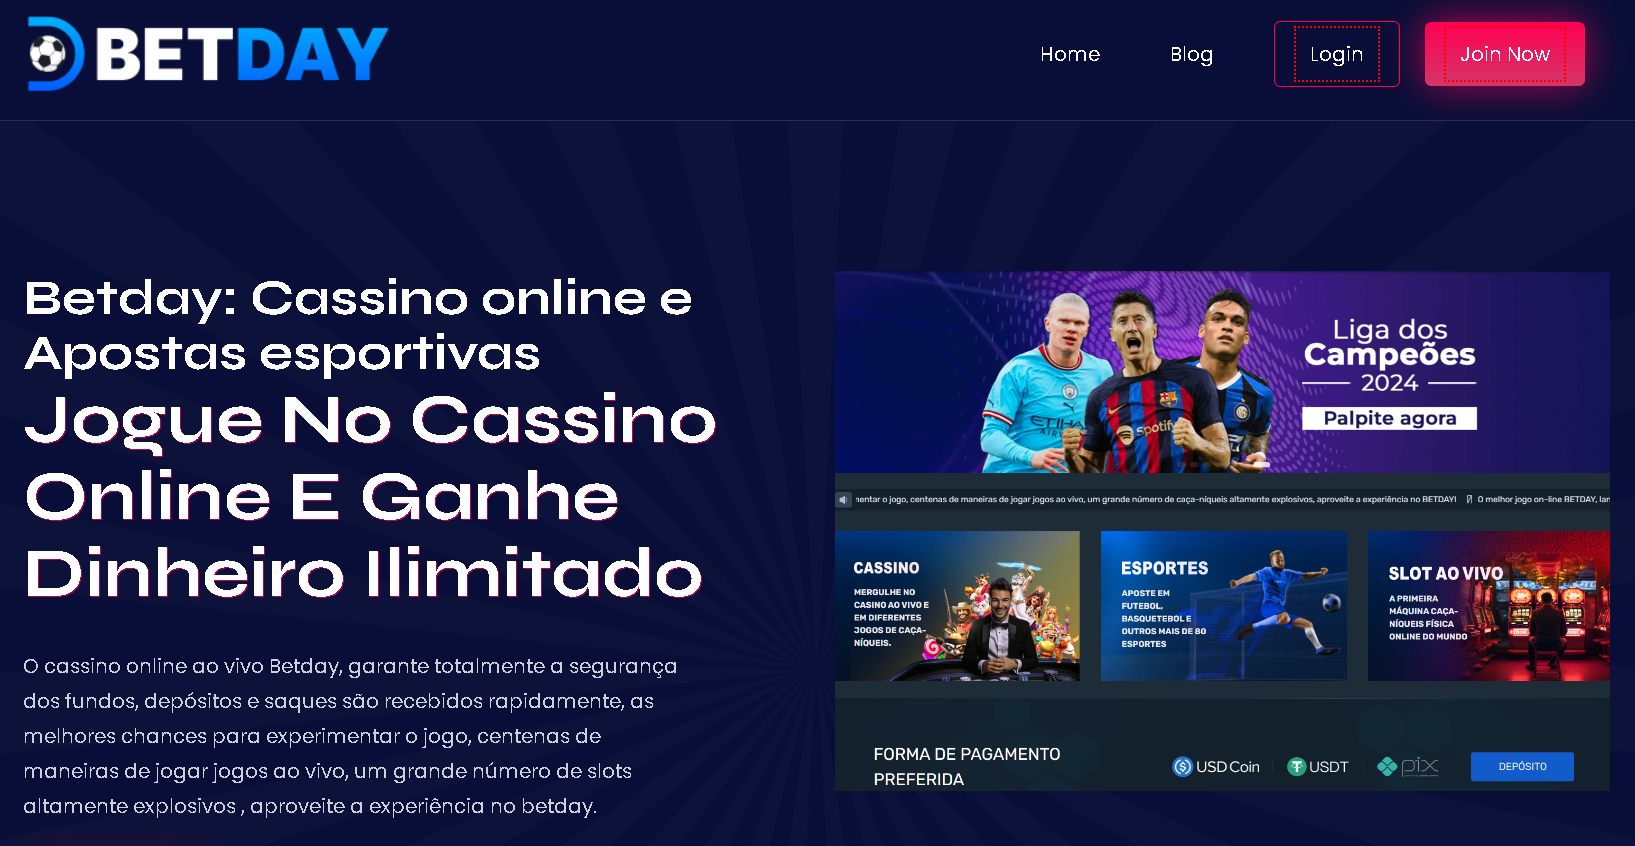 The Best Tips For New Players at Betday Cassino Online